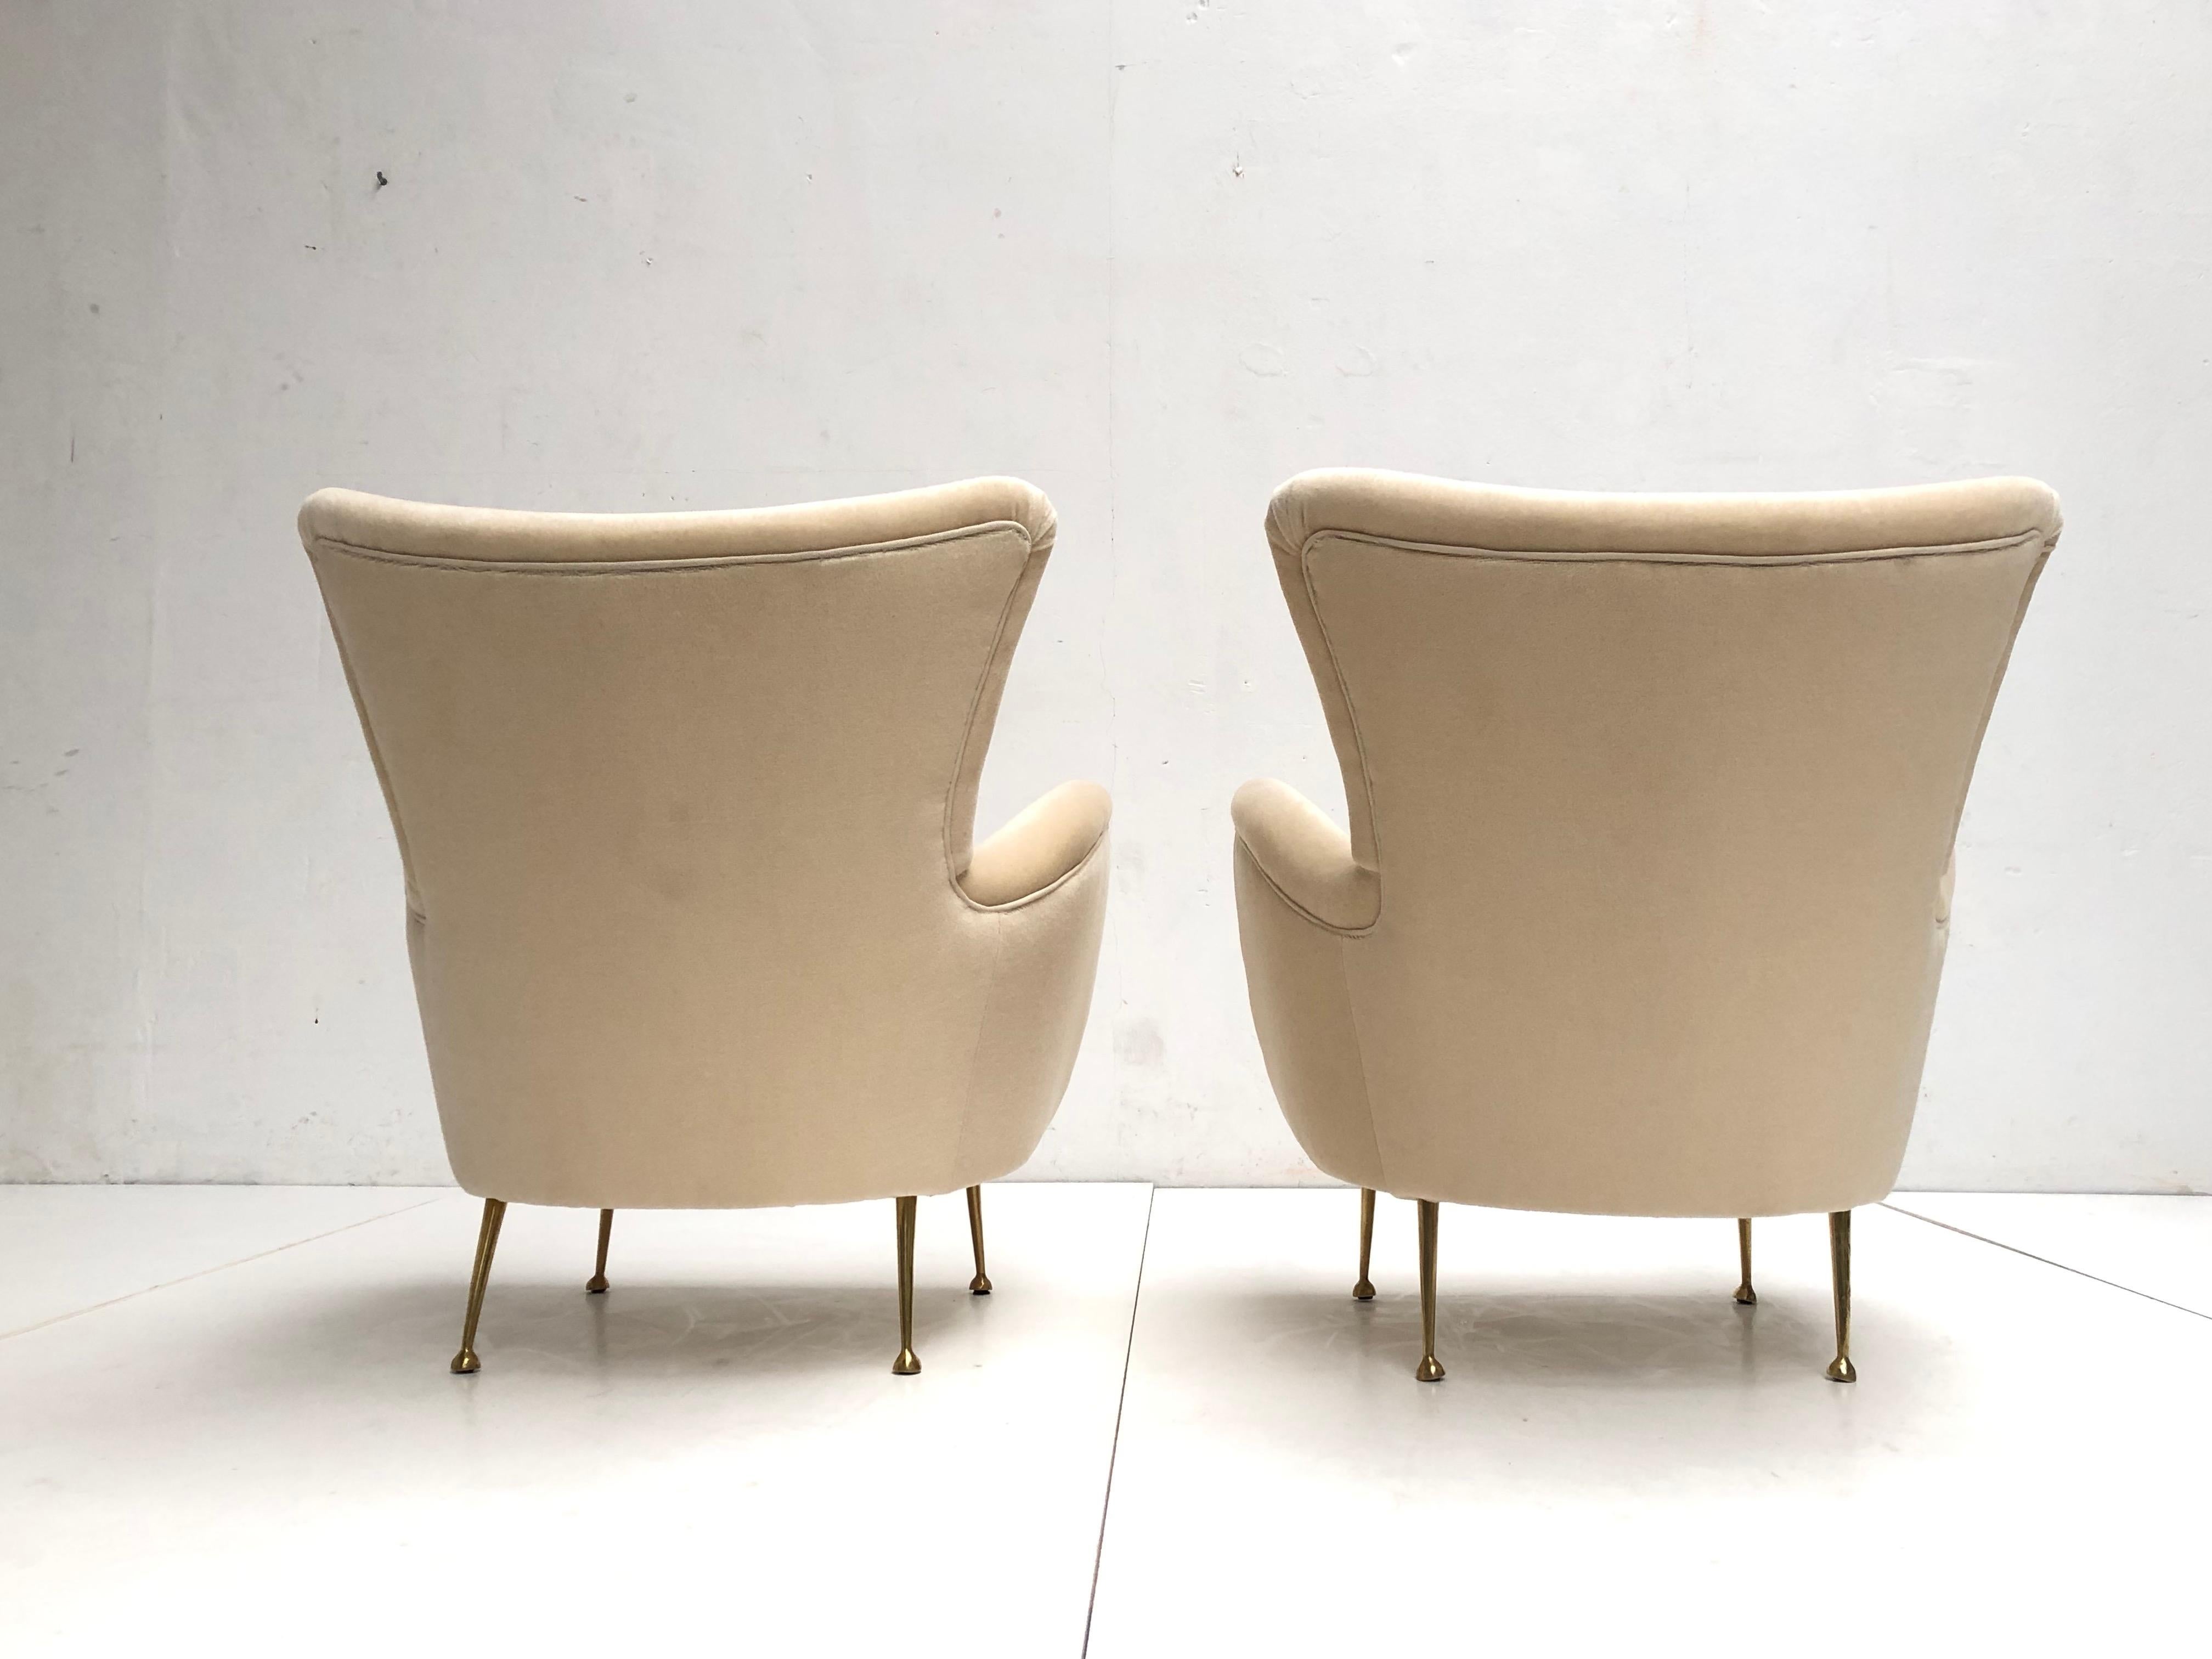 Seagrass Sculptural Form Lounge Chairs, Mohair Fabric with Brass Legs, ISA, Italy, 1950 For Sale